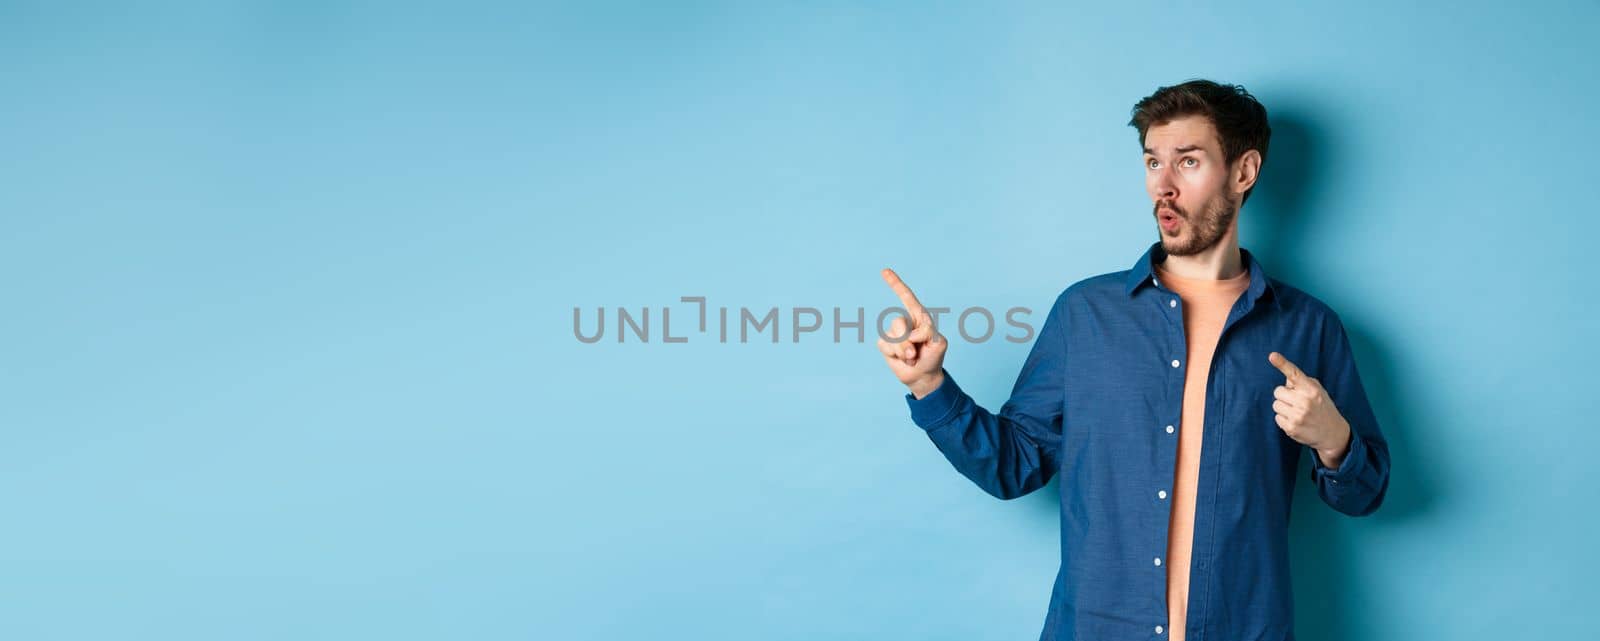 Impressed guy looking and pointing at upper left corner, showing advertisement, standing on blue background.